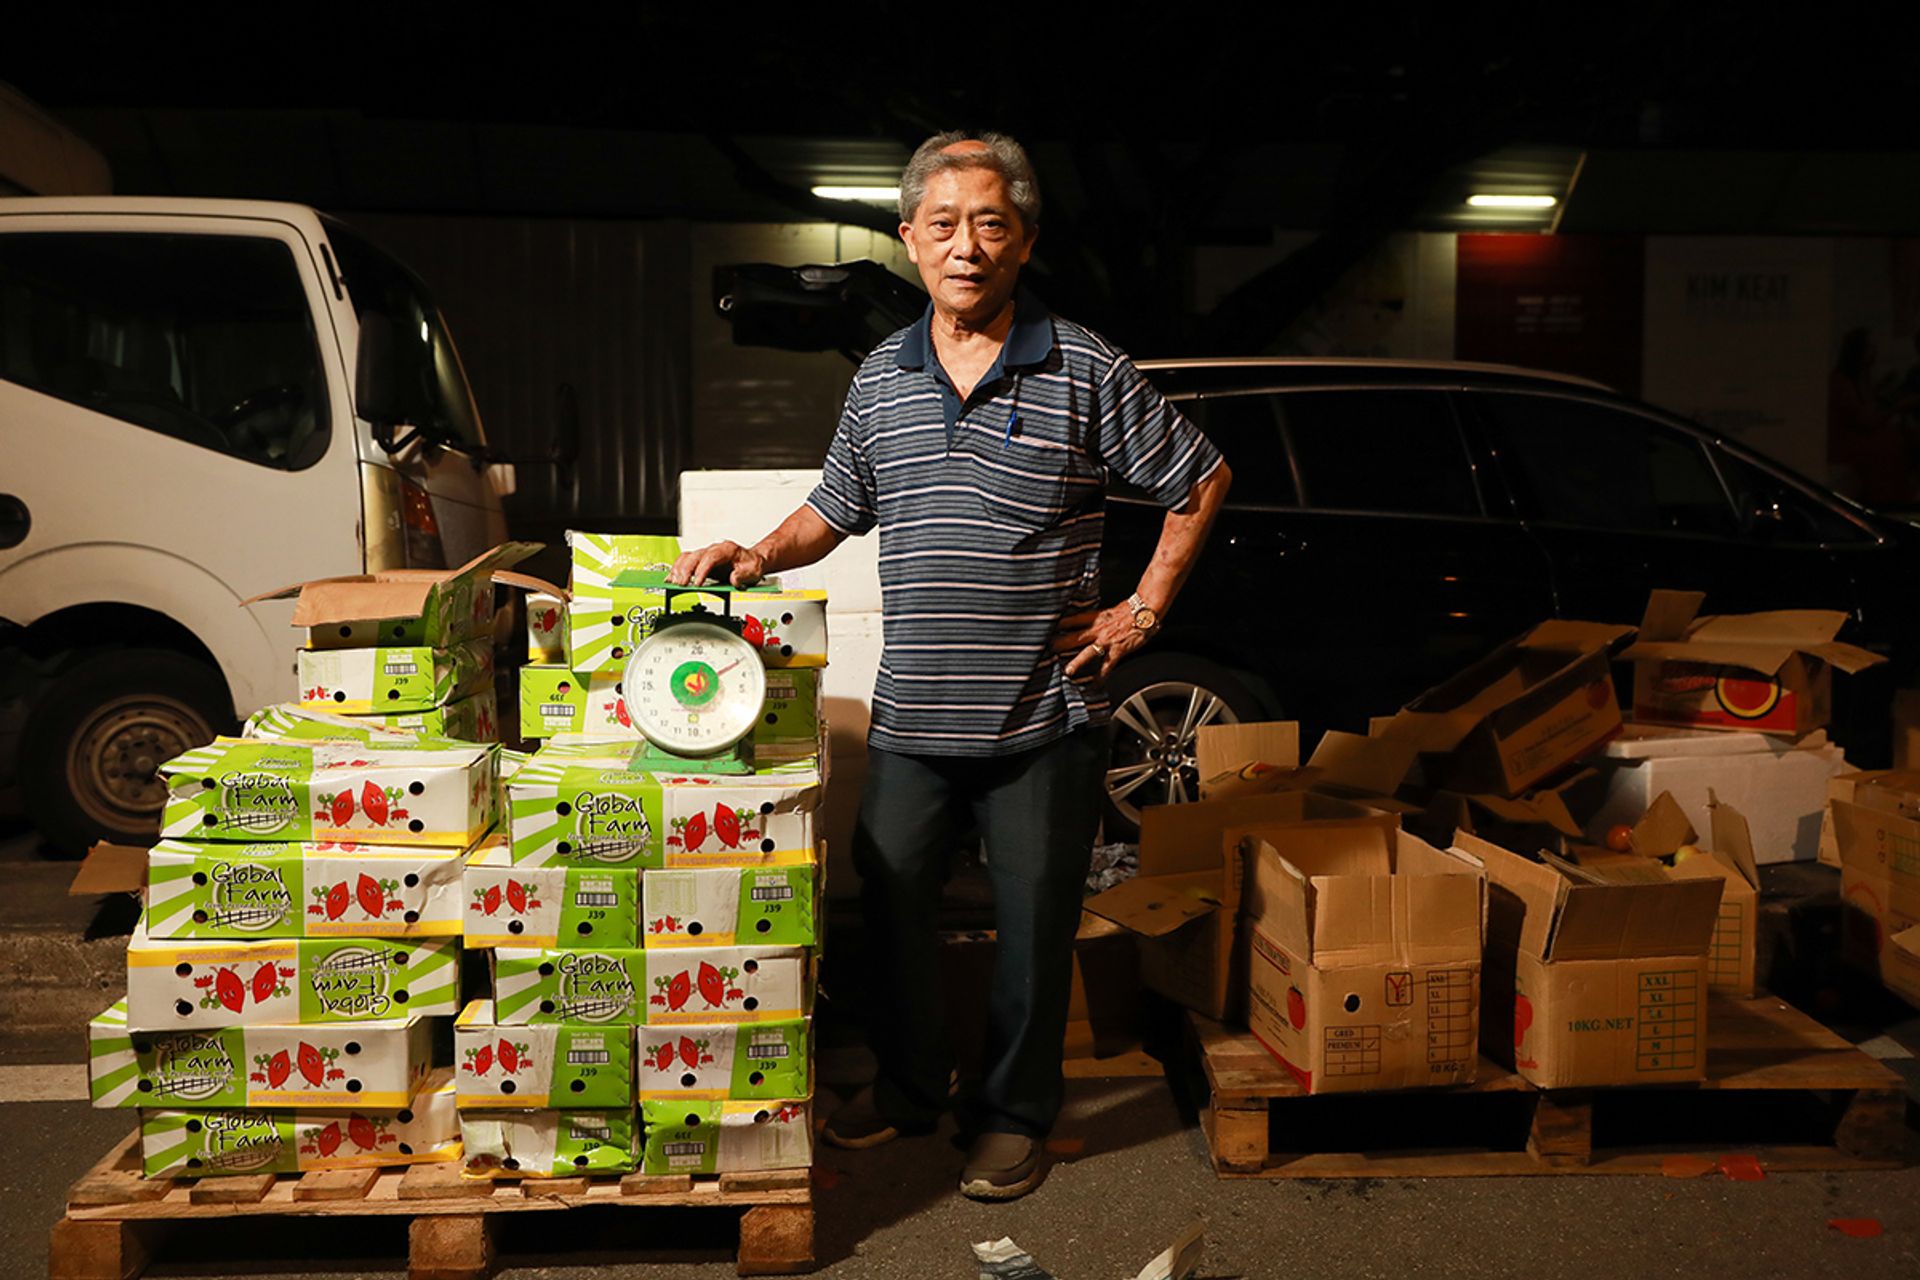 Mr Ong Eng Seng at his makeshift stall on June 30. “All the old people are gone, it’s just me left,” he said. “I grew up here, of course I’ll miss this place very much.”